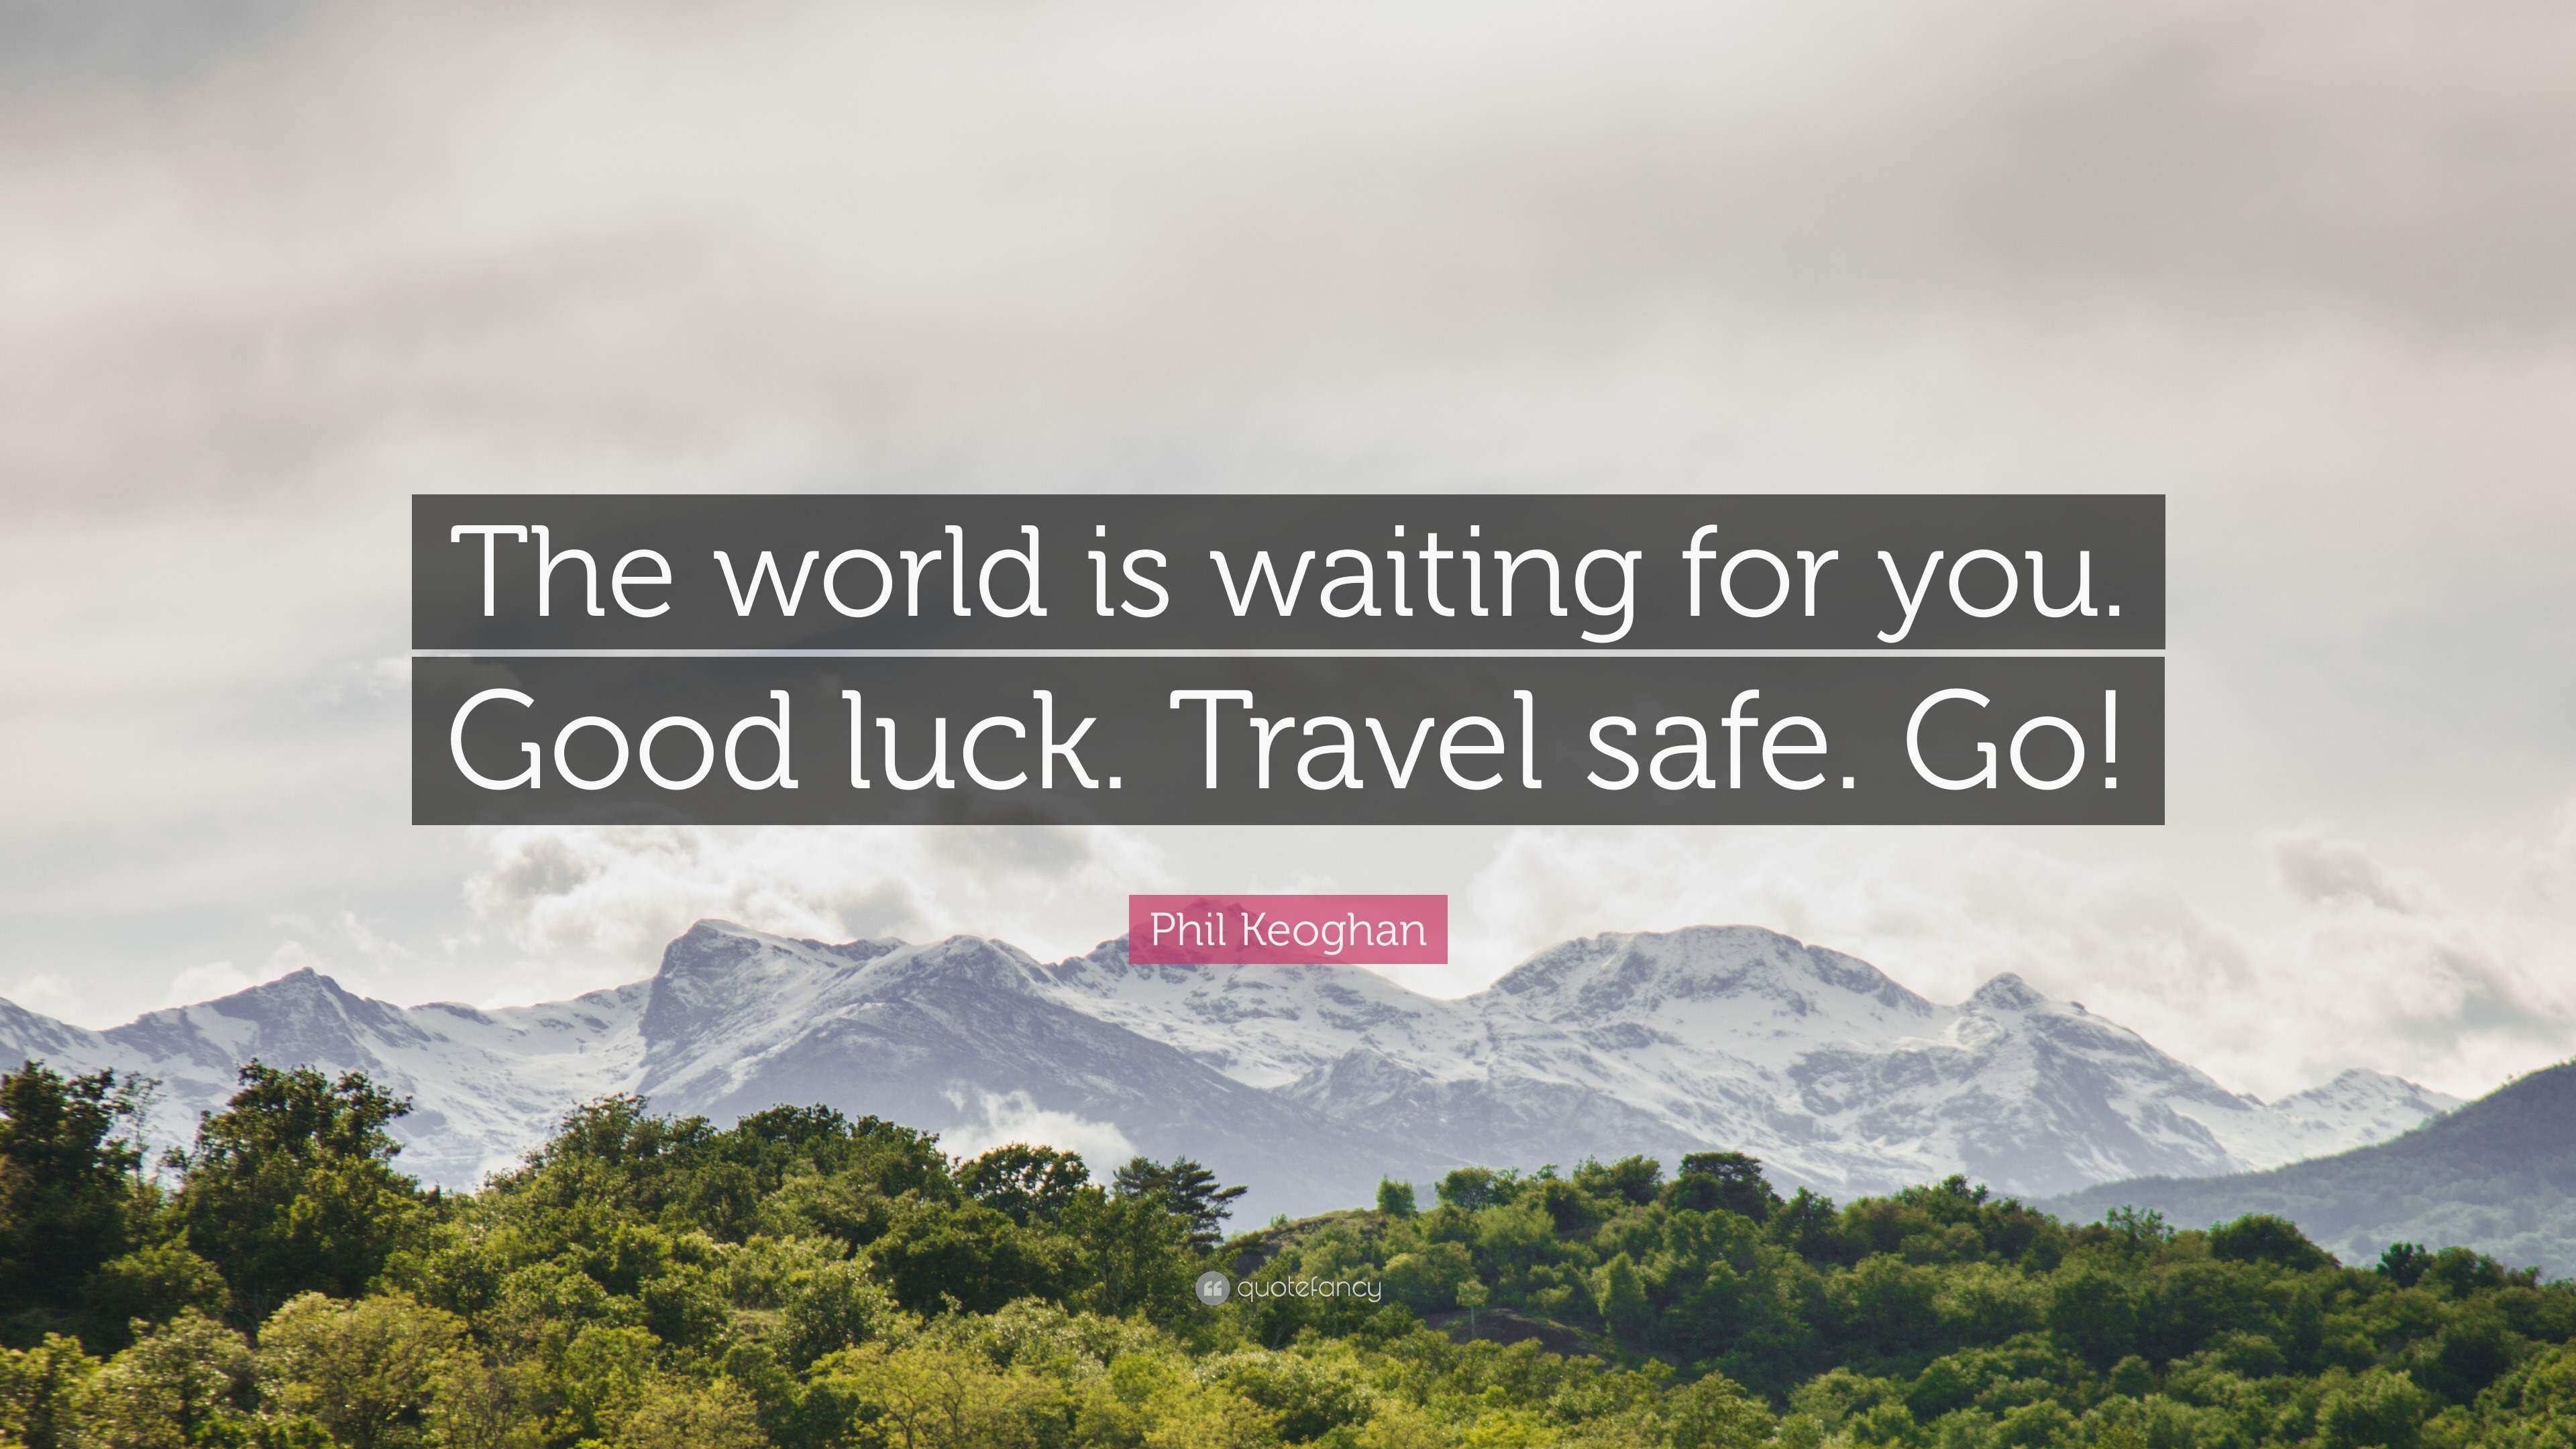 Phil Keoghan Quote: “The world is waiting for you. Good luck. Travel safe.  Go!”